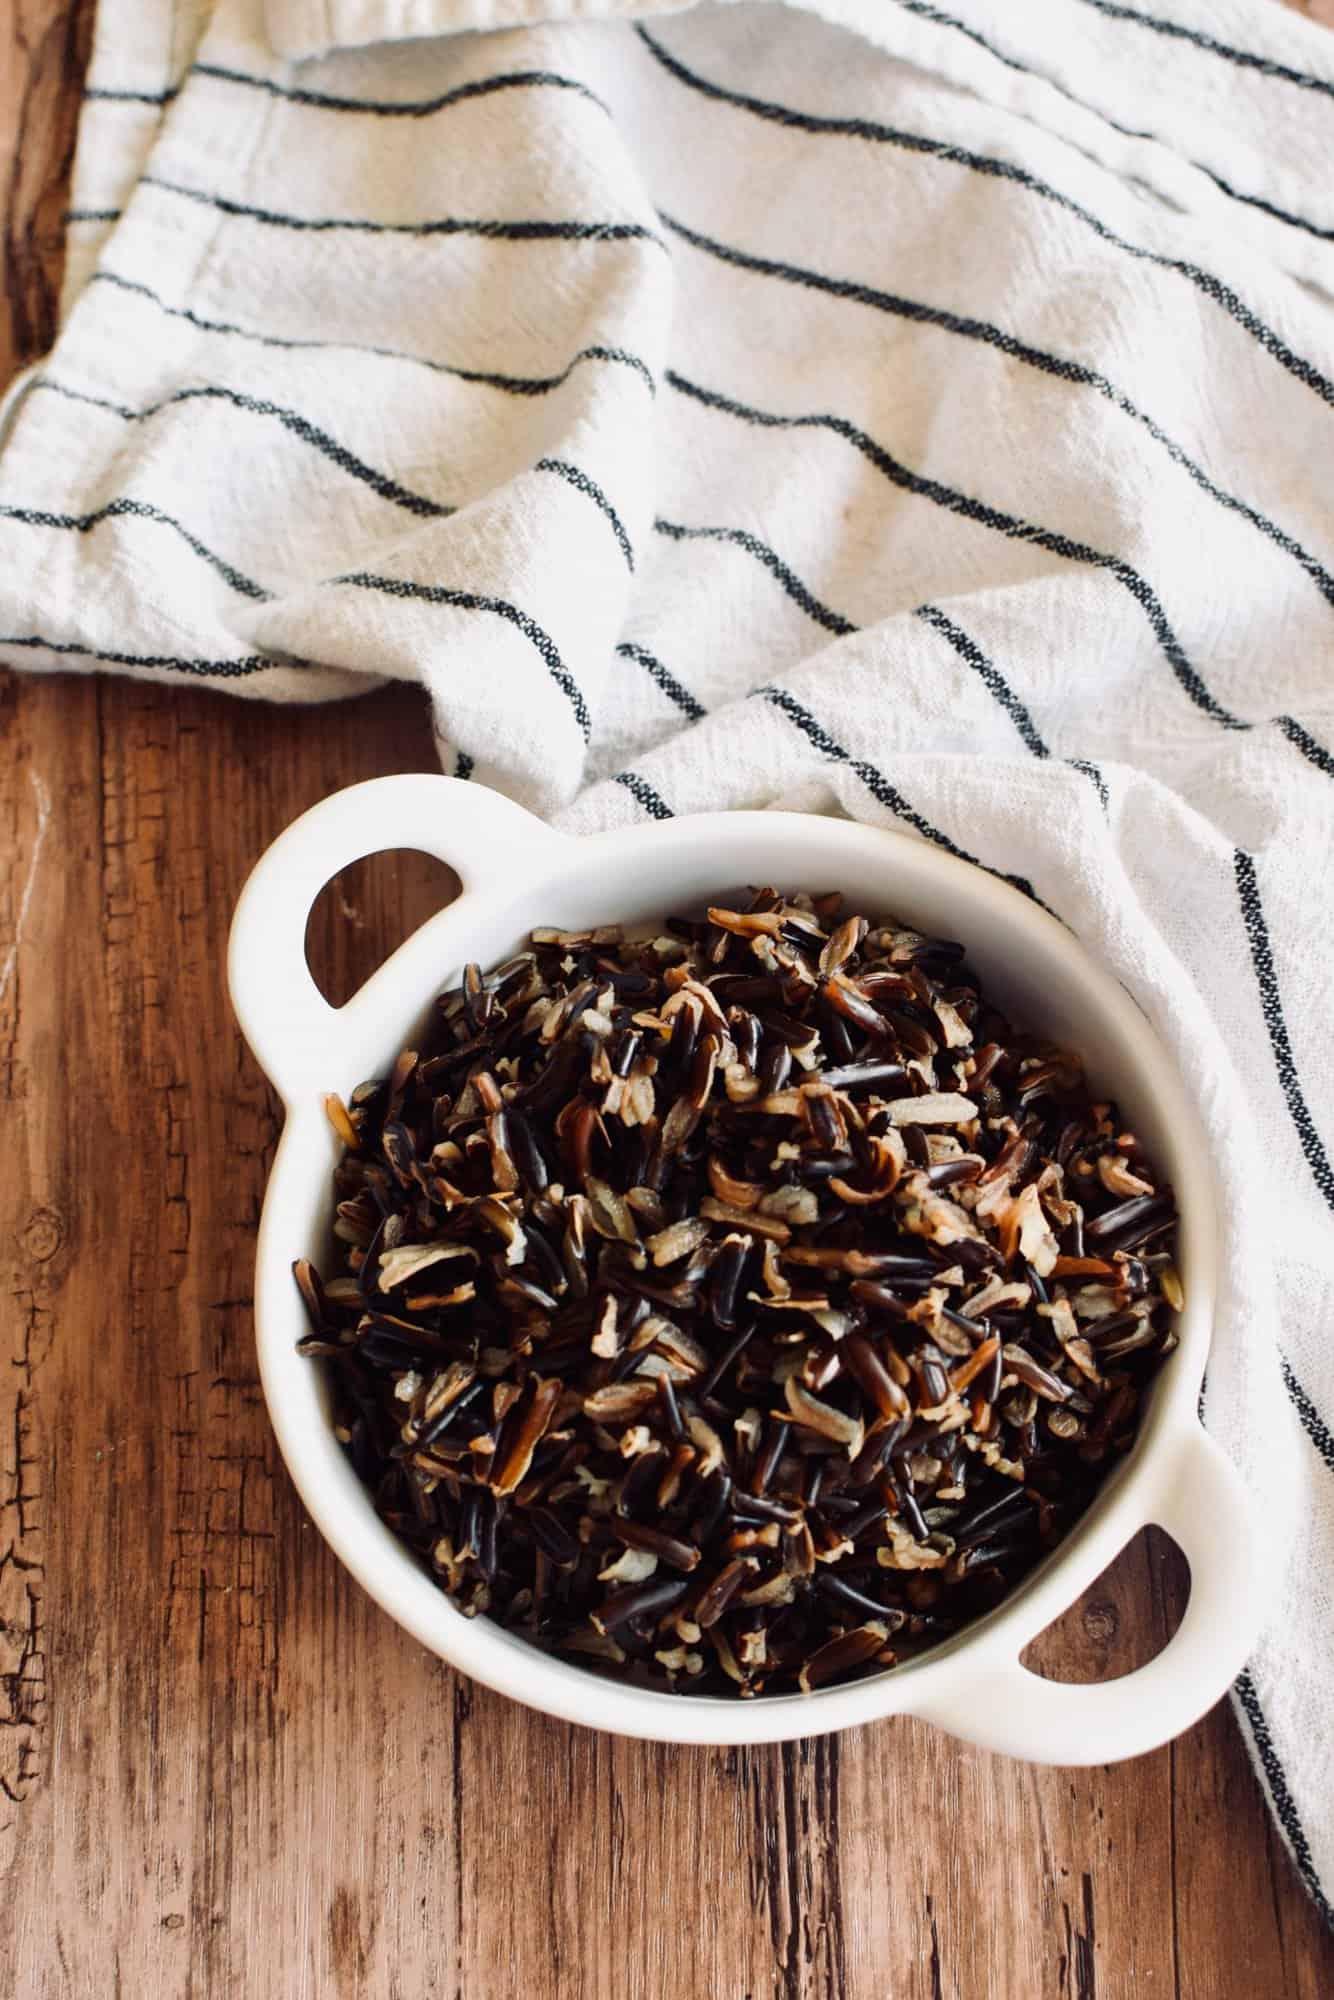 a small bowl of cooked wild rice on a wooden table.